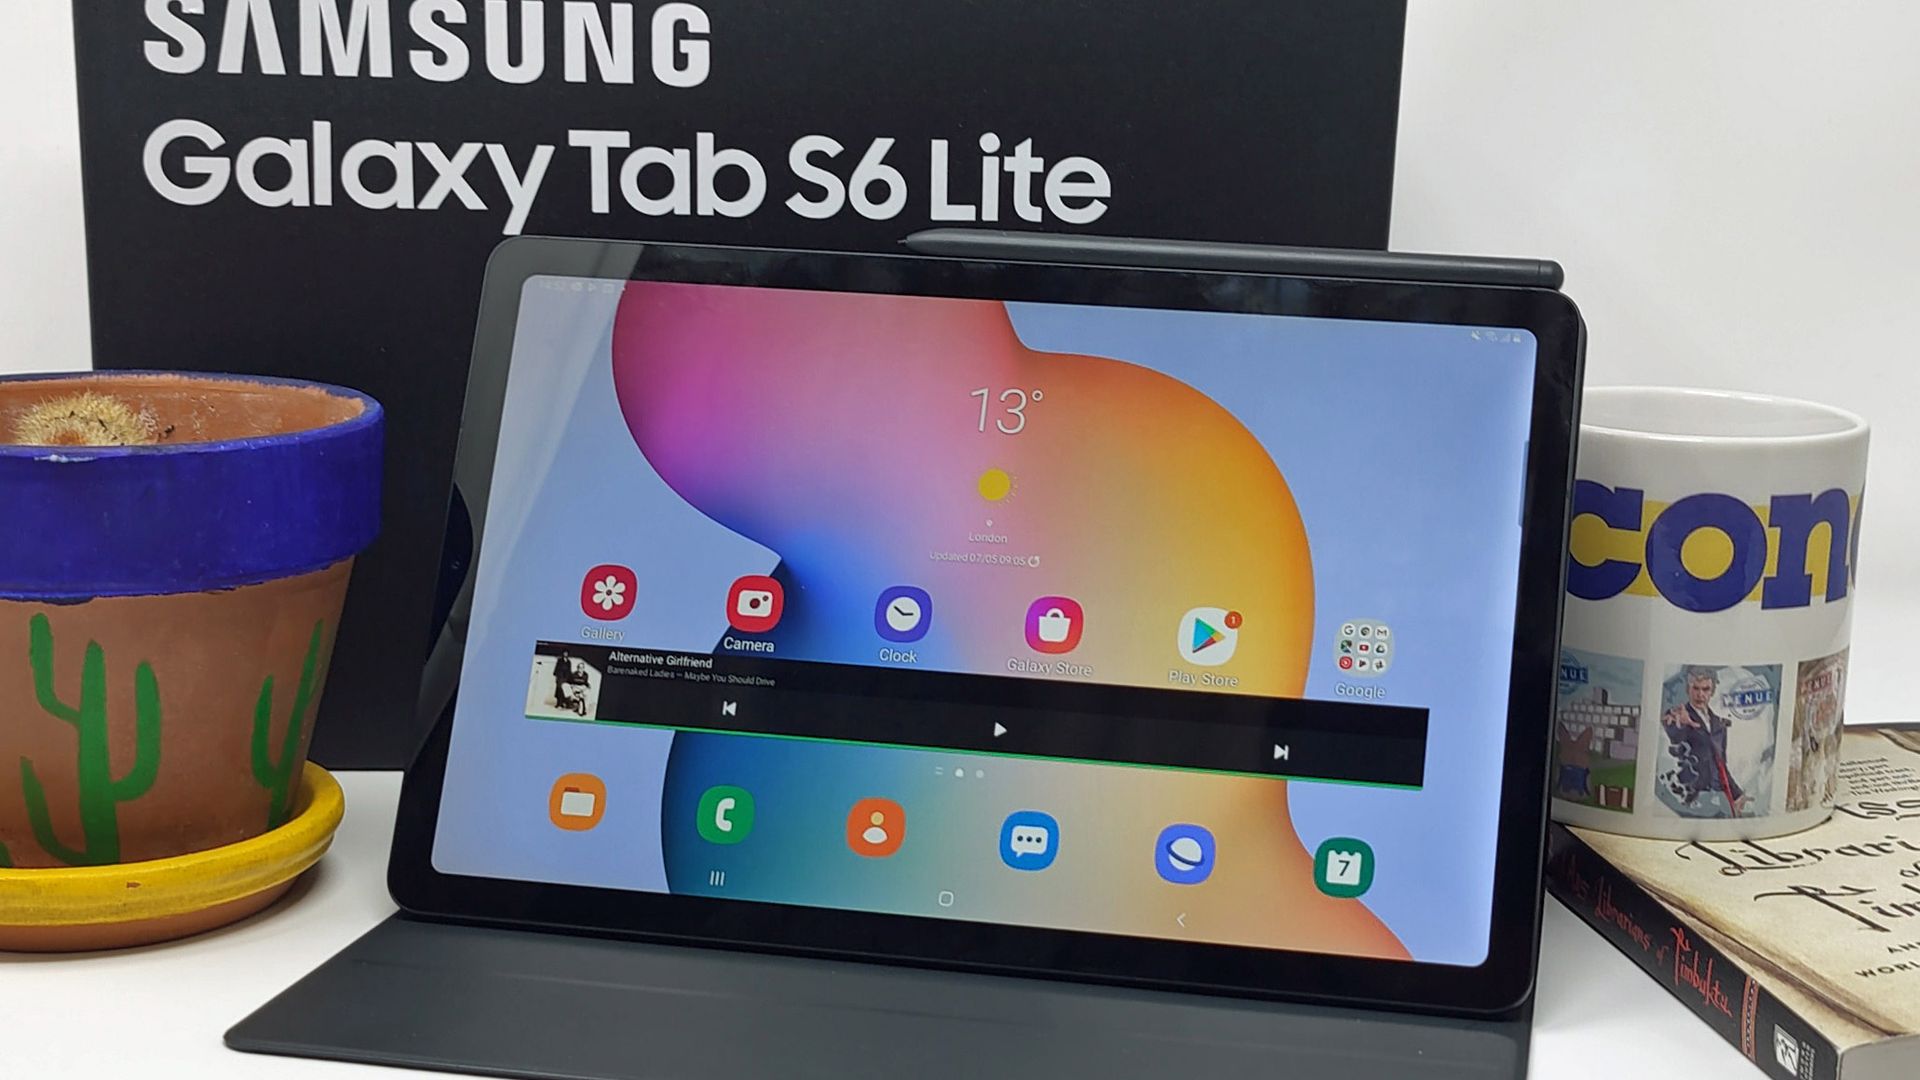 Samsung Galaxy Tab S6 Lite with S Pen launched in India TechRadar